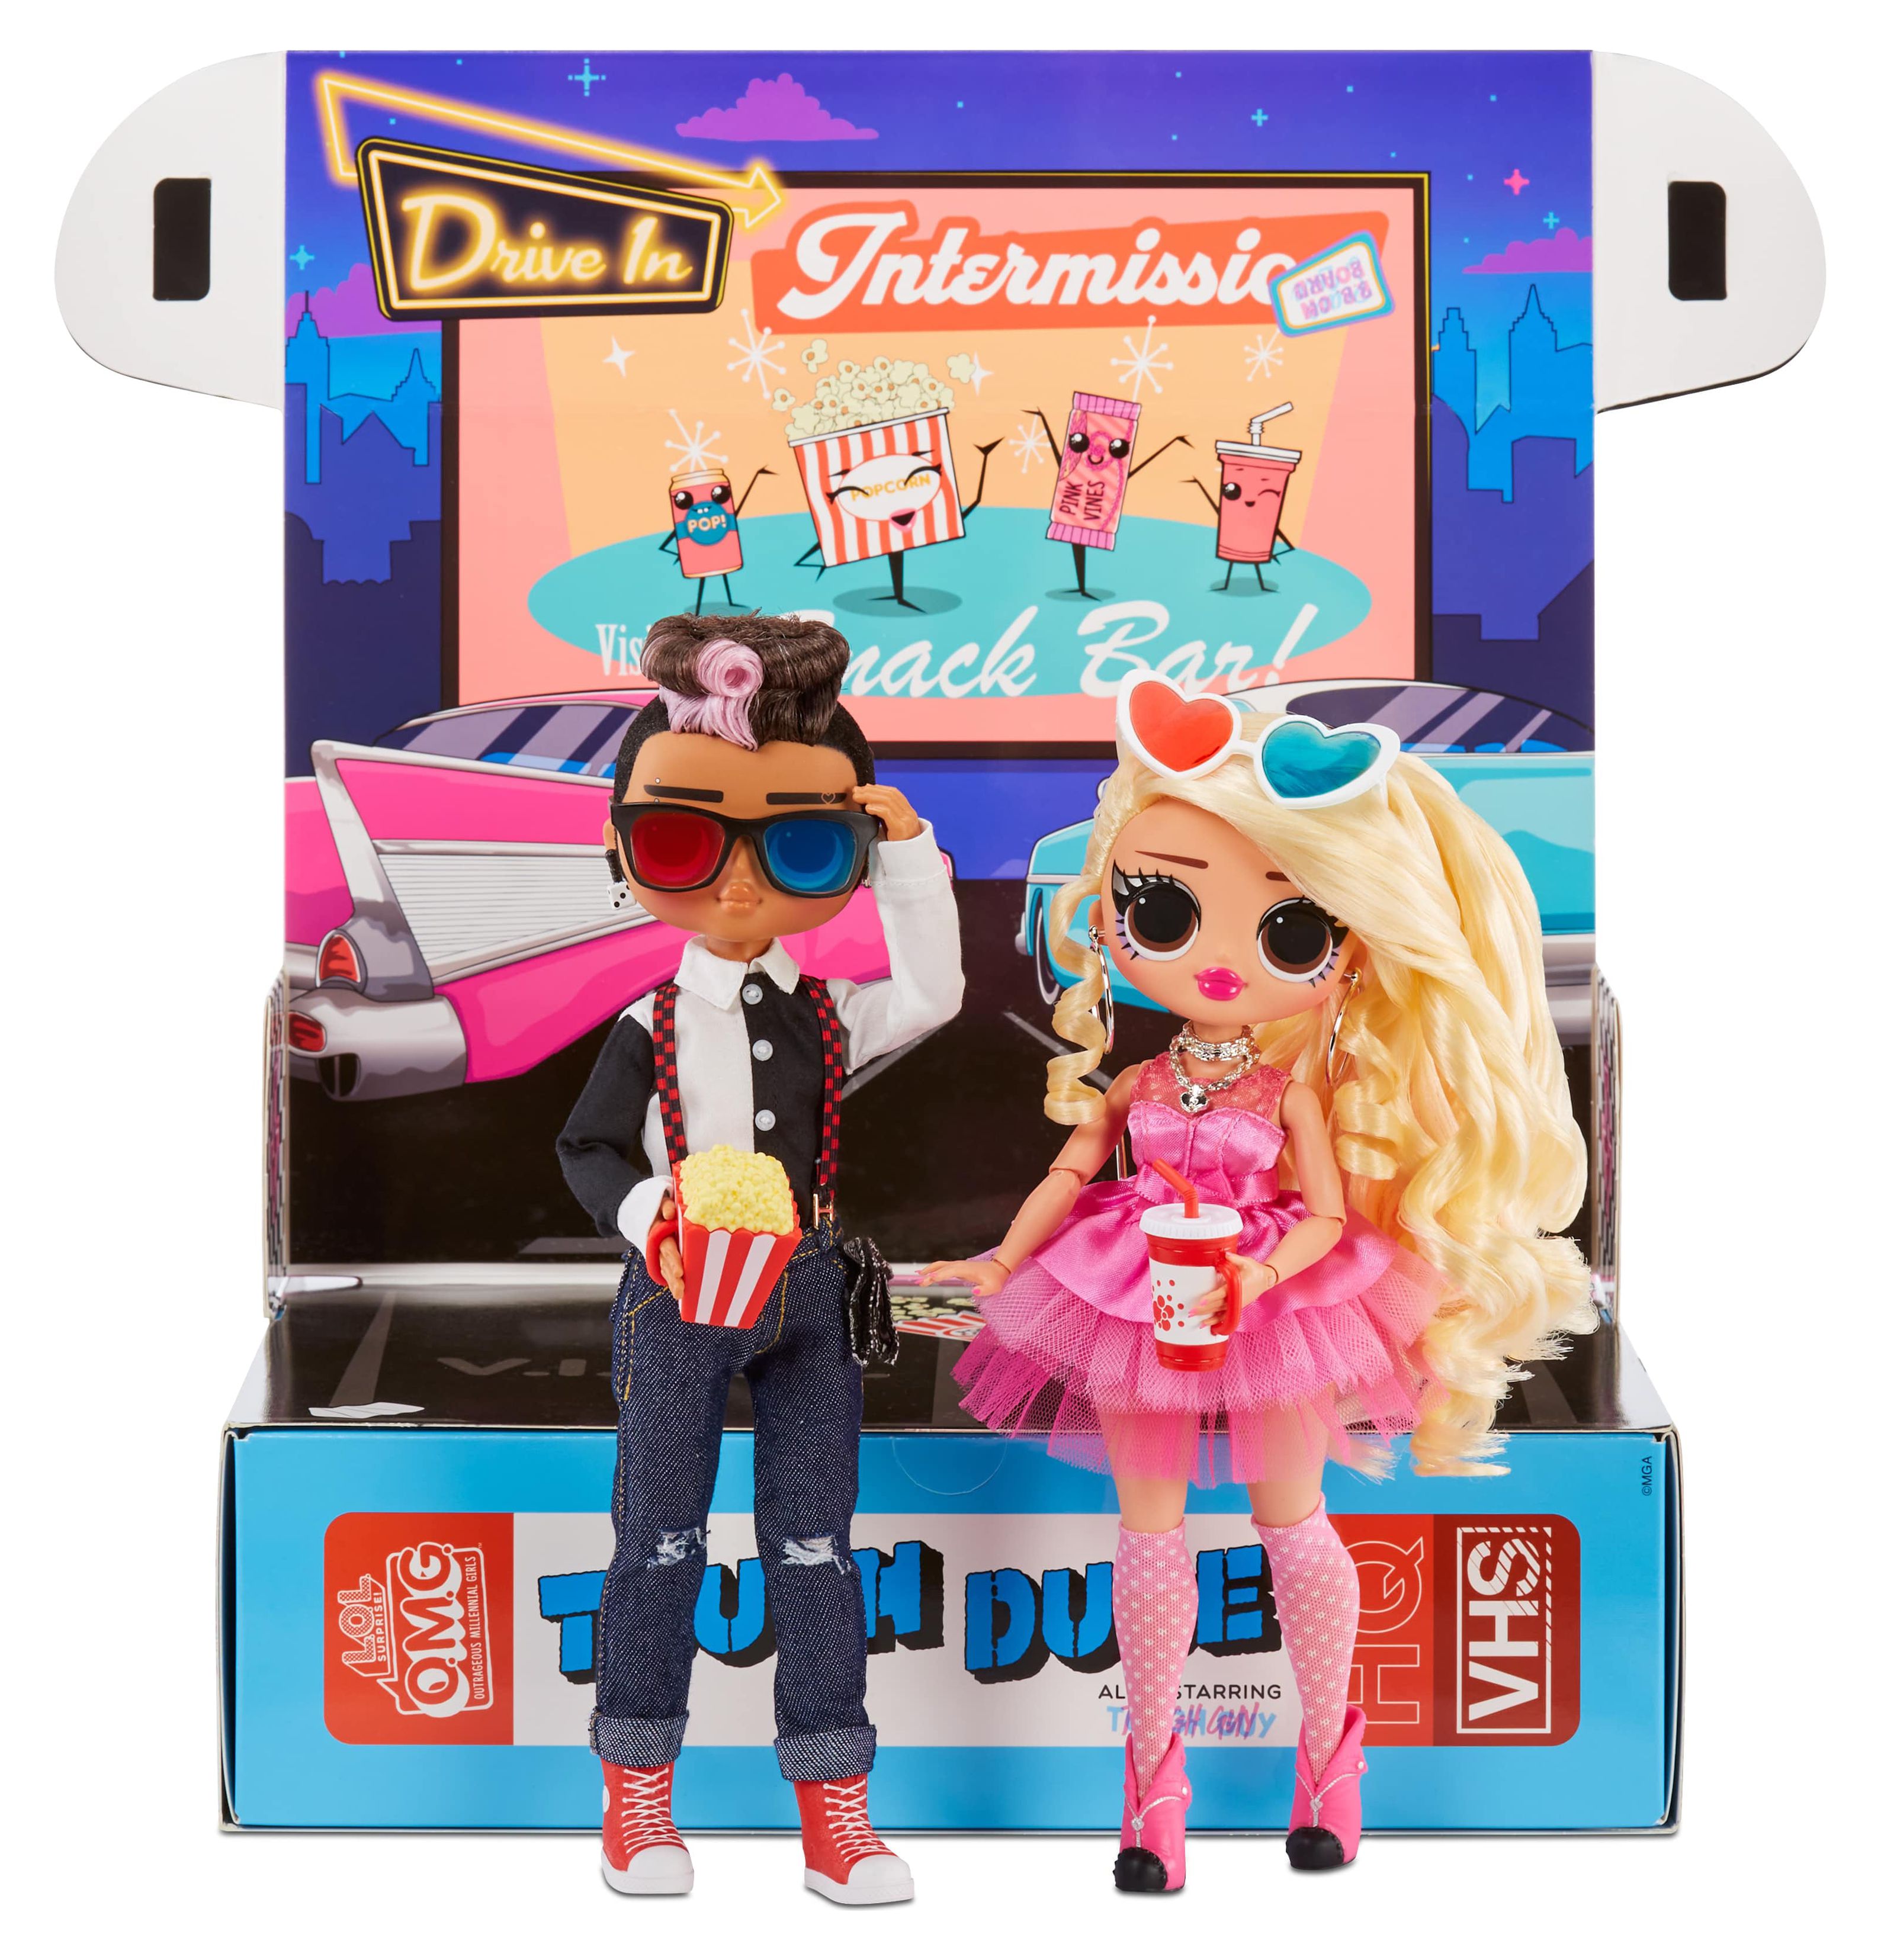 L.O.L Surprise! OMG Movie Magic Fashion Tough Dude and Pink Chick Doll Playset, 25 Pieecs - image 4 of 7